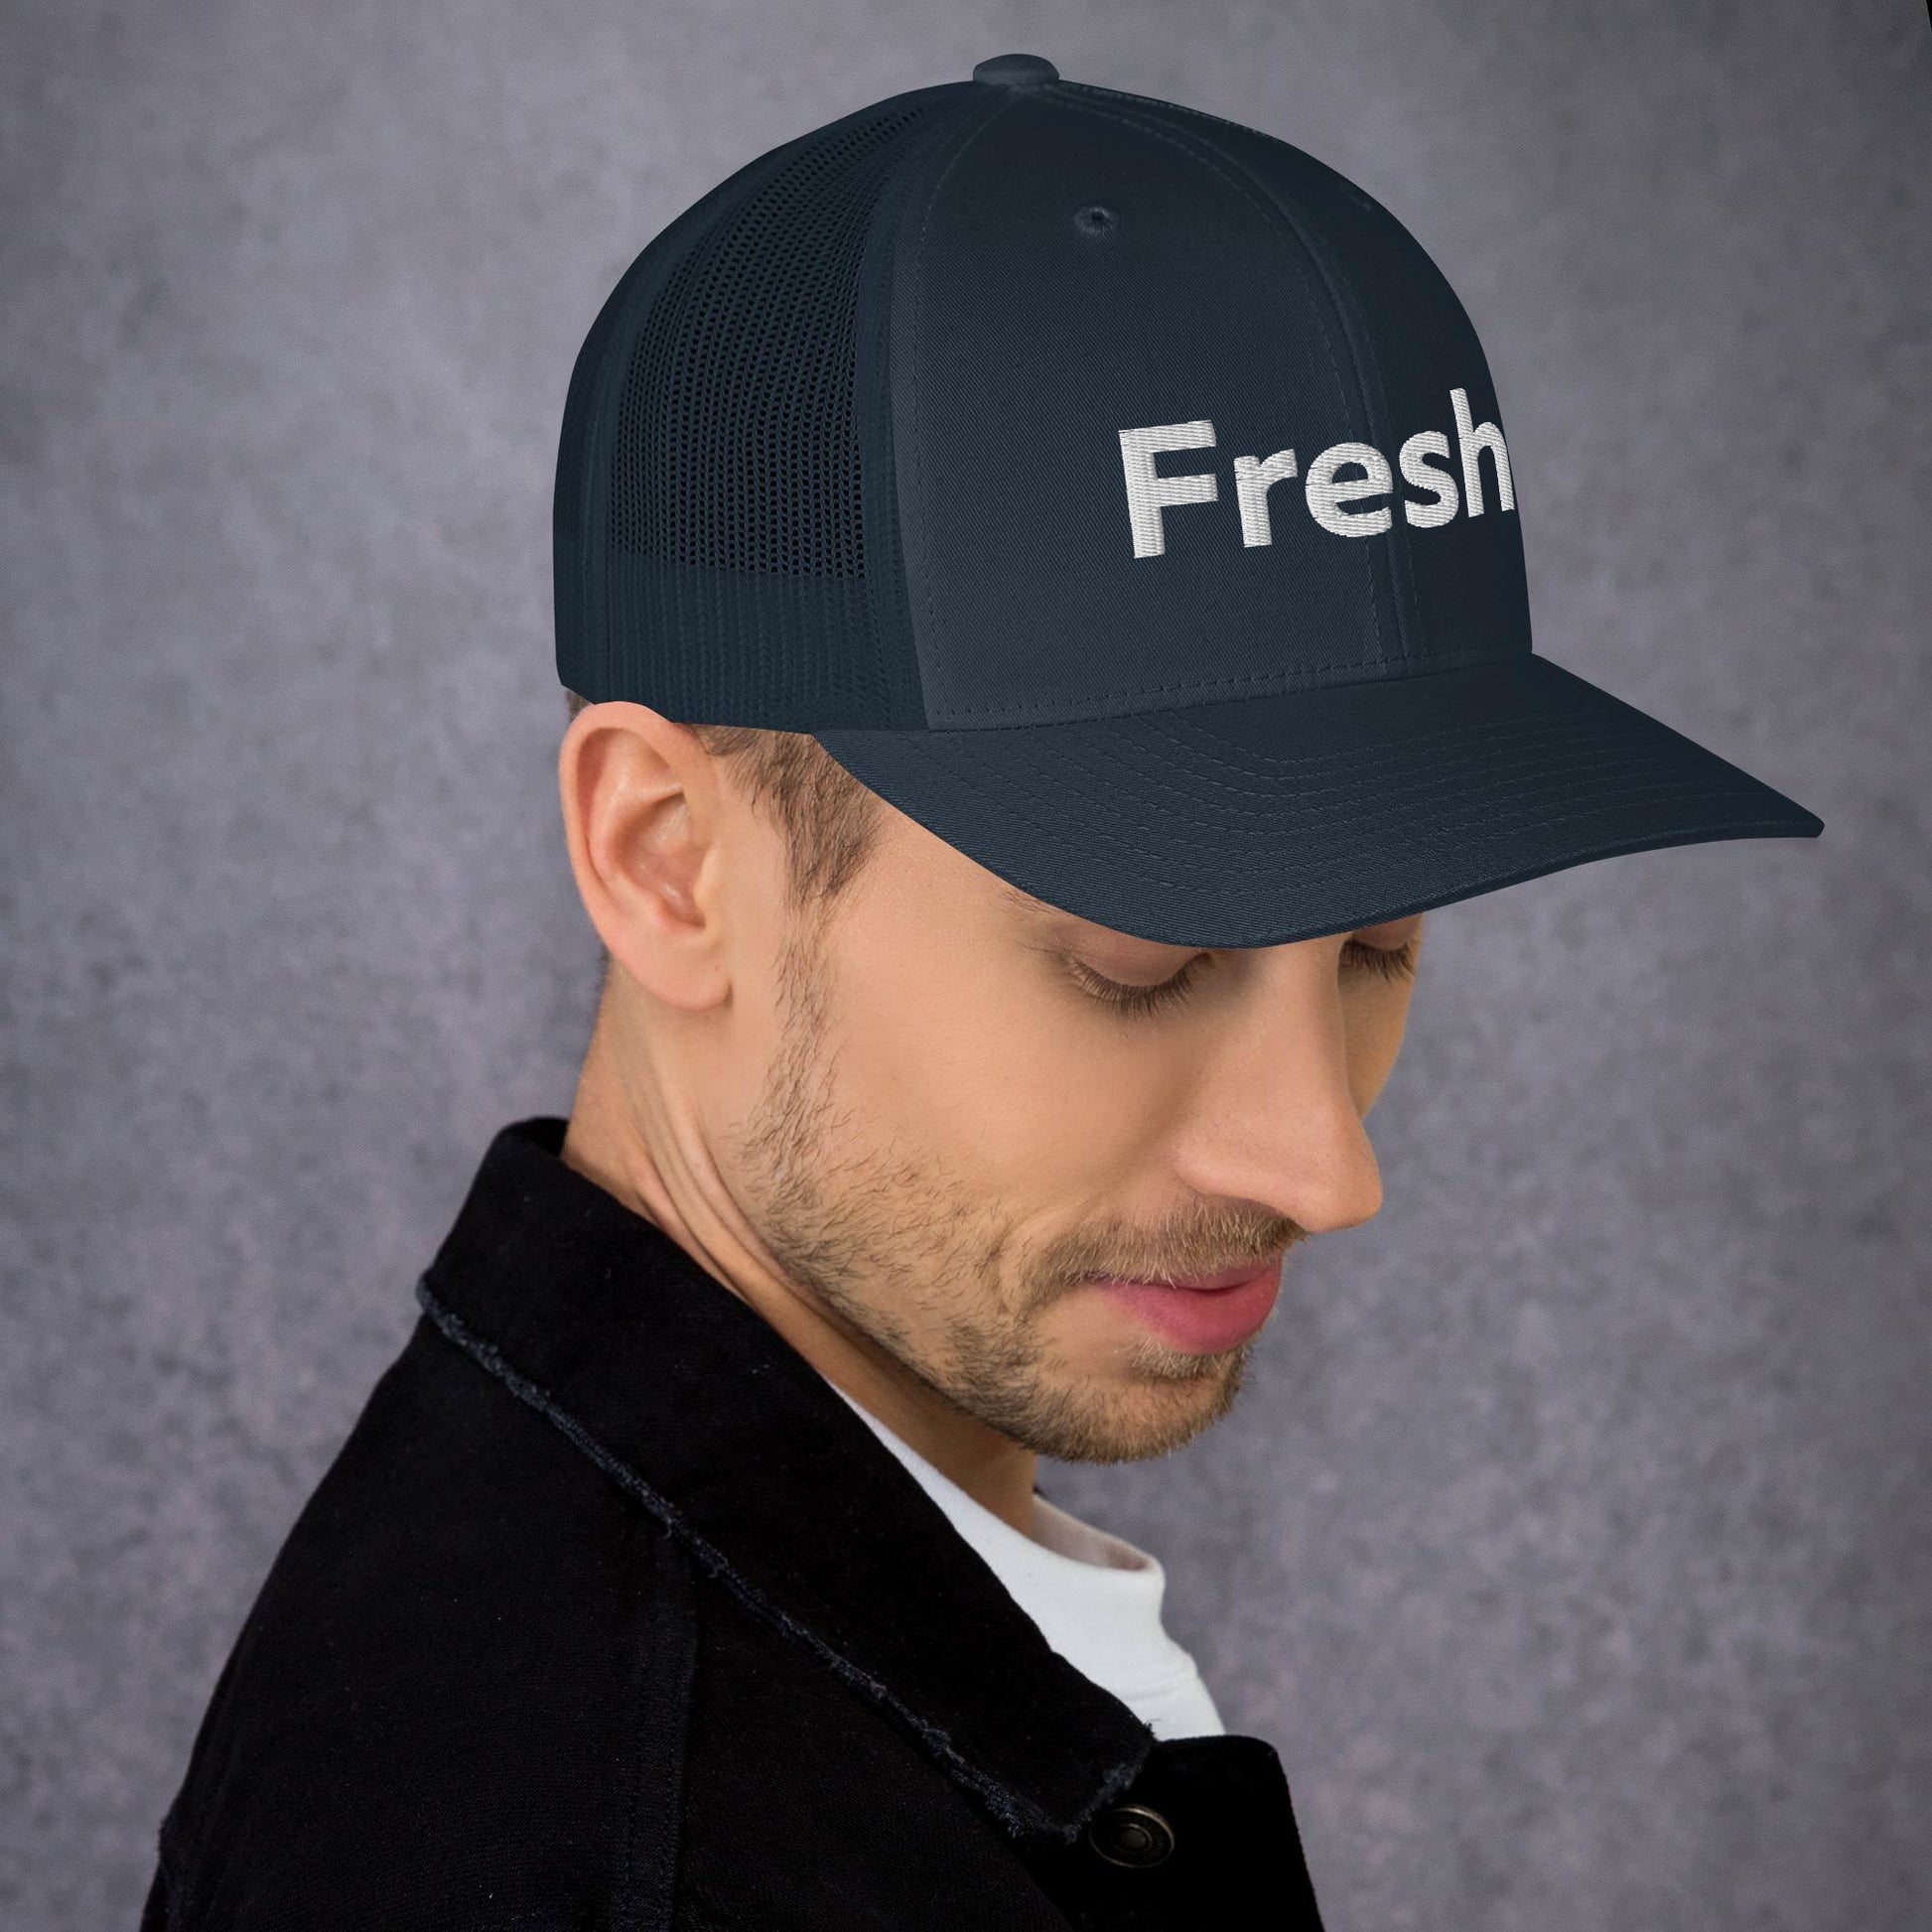 Looking for a hat that combines style and comfort? Look no further than the Fresh Hat! Color: Navy